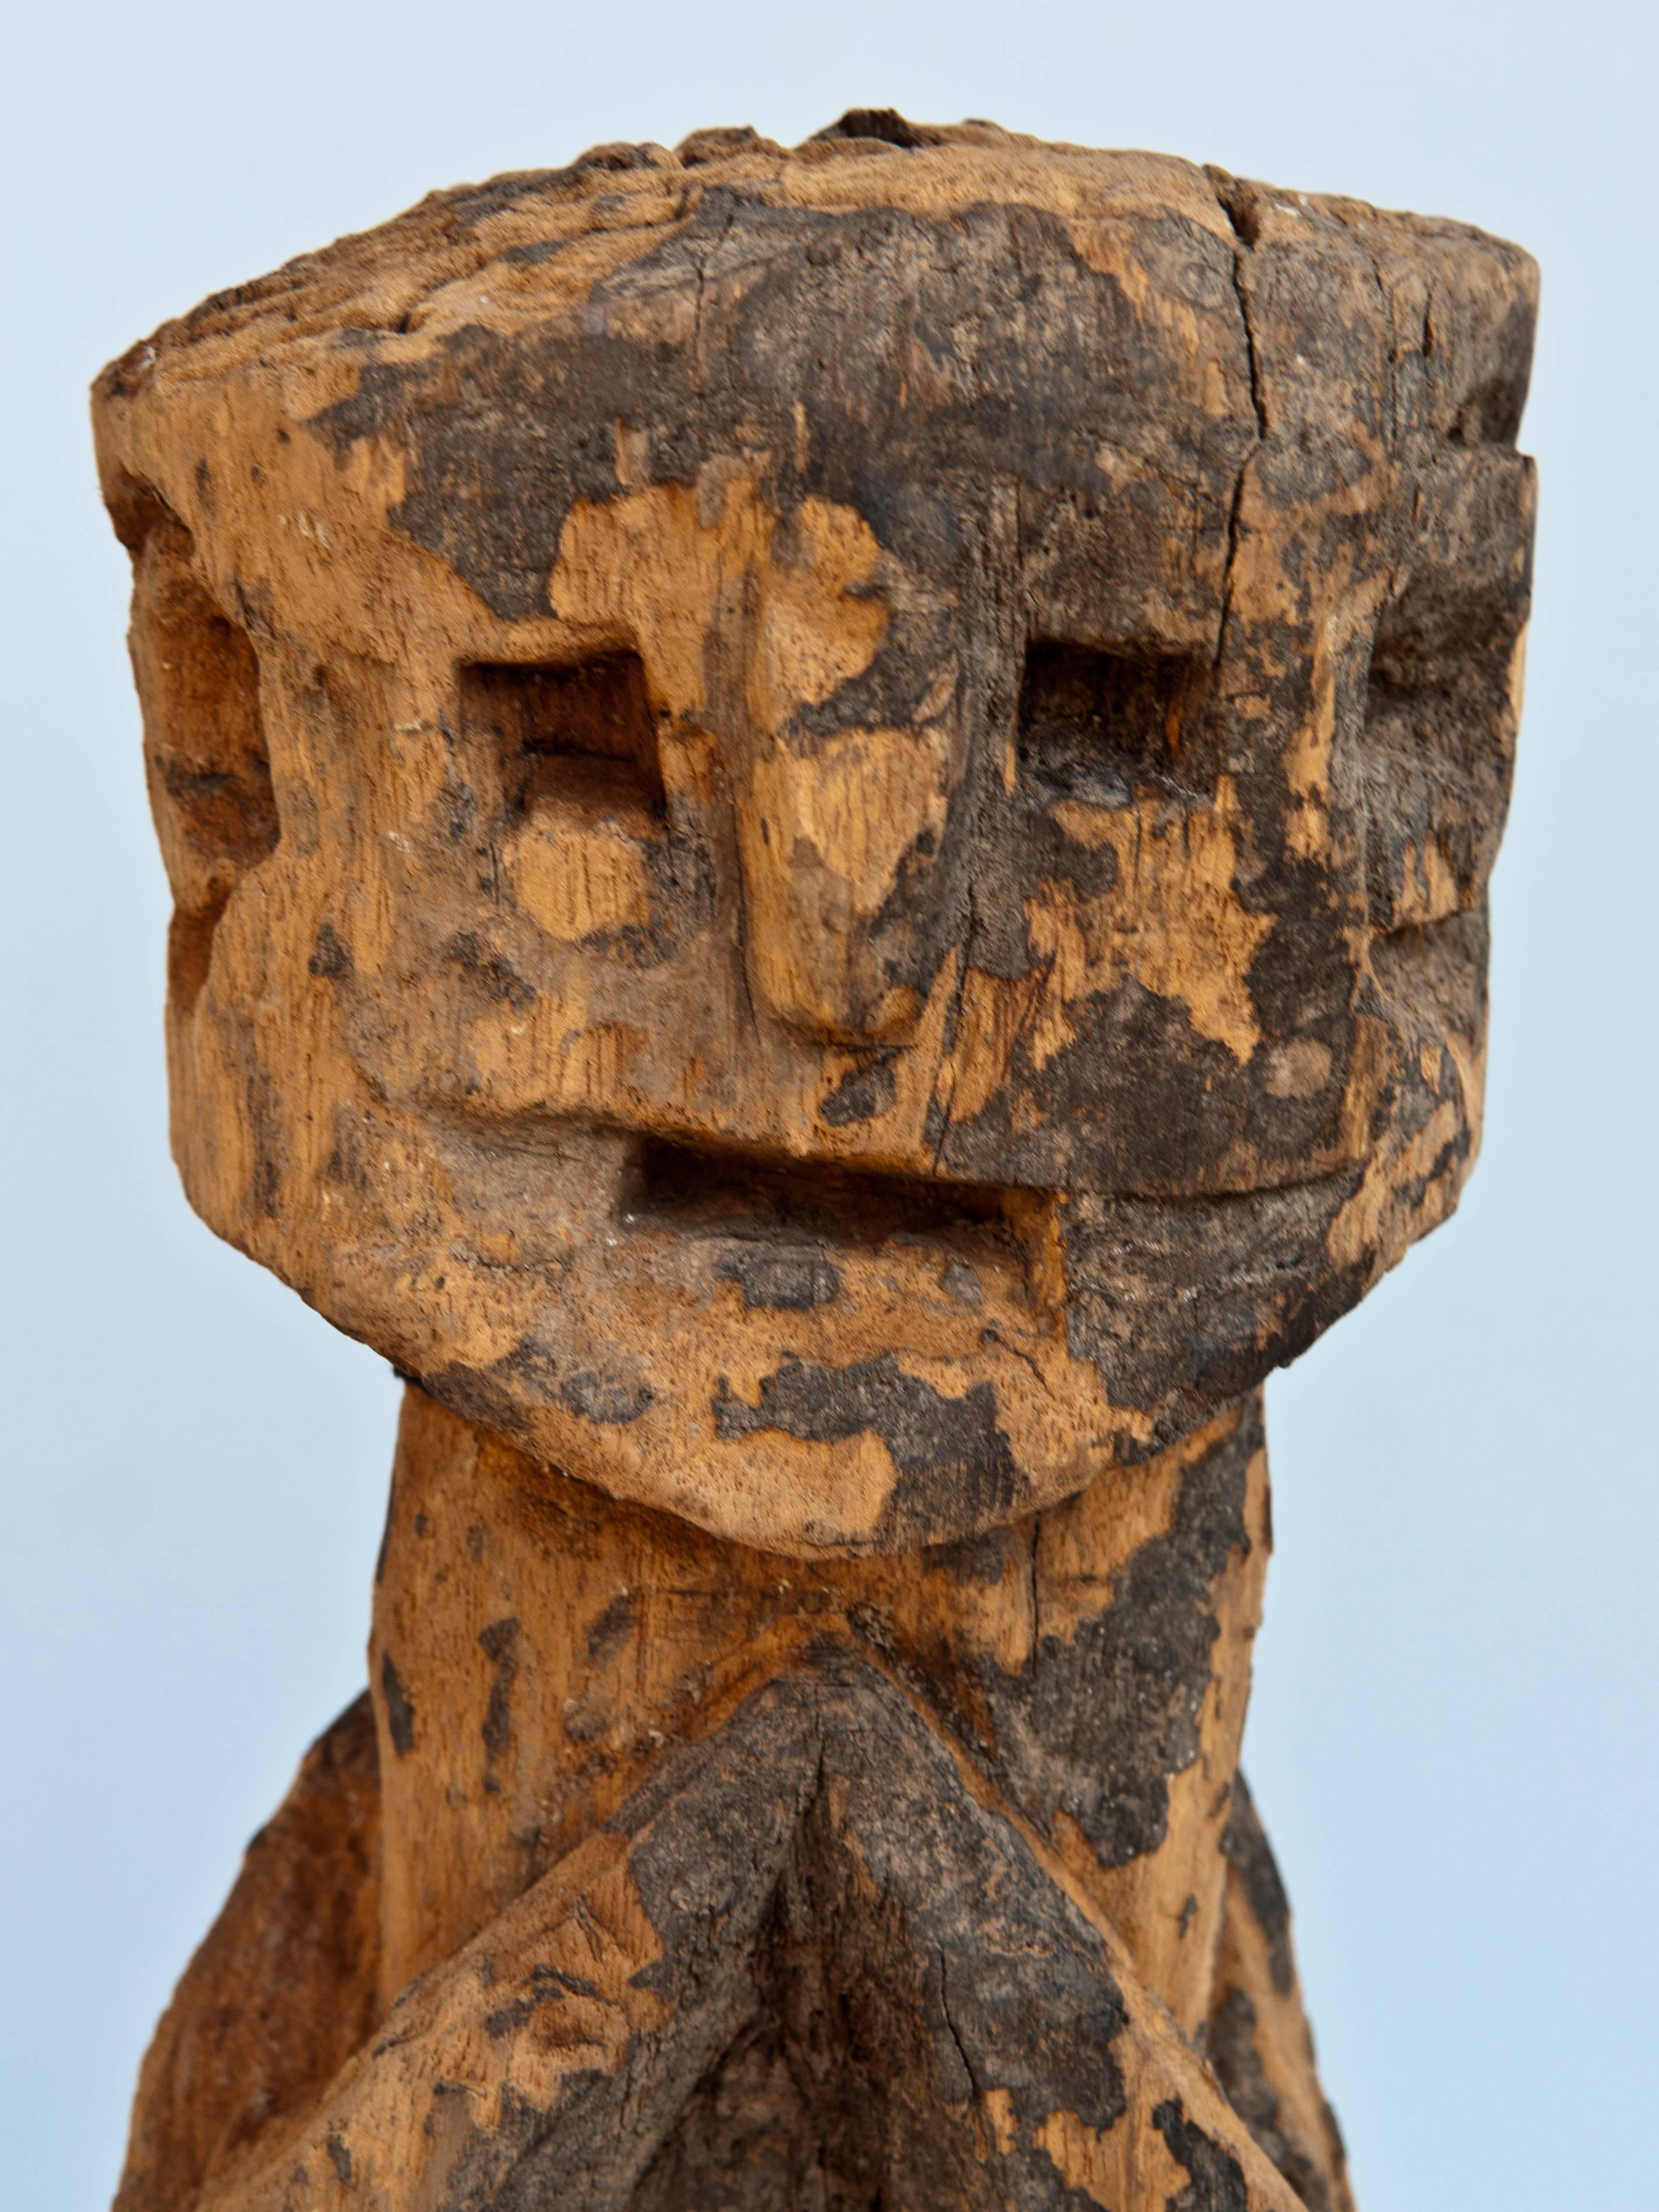 Wooden ancestral figure from West Nepal. Early to mid 20th century. Wooden stand
Wooden ancestral figure from West Nepal, from the early to mid 20th century. This small statue is attributed to the Khas people, an Indo Aryan people of vague and